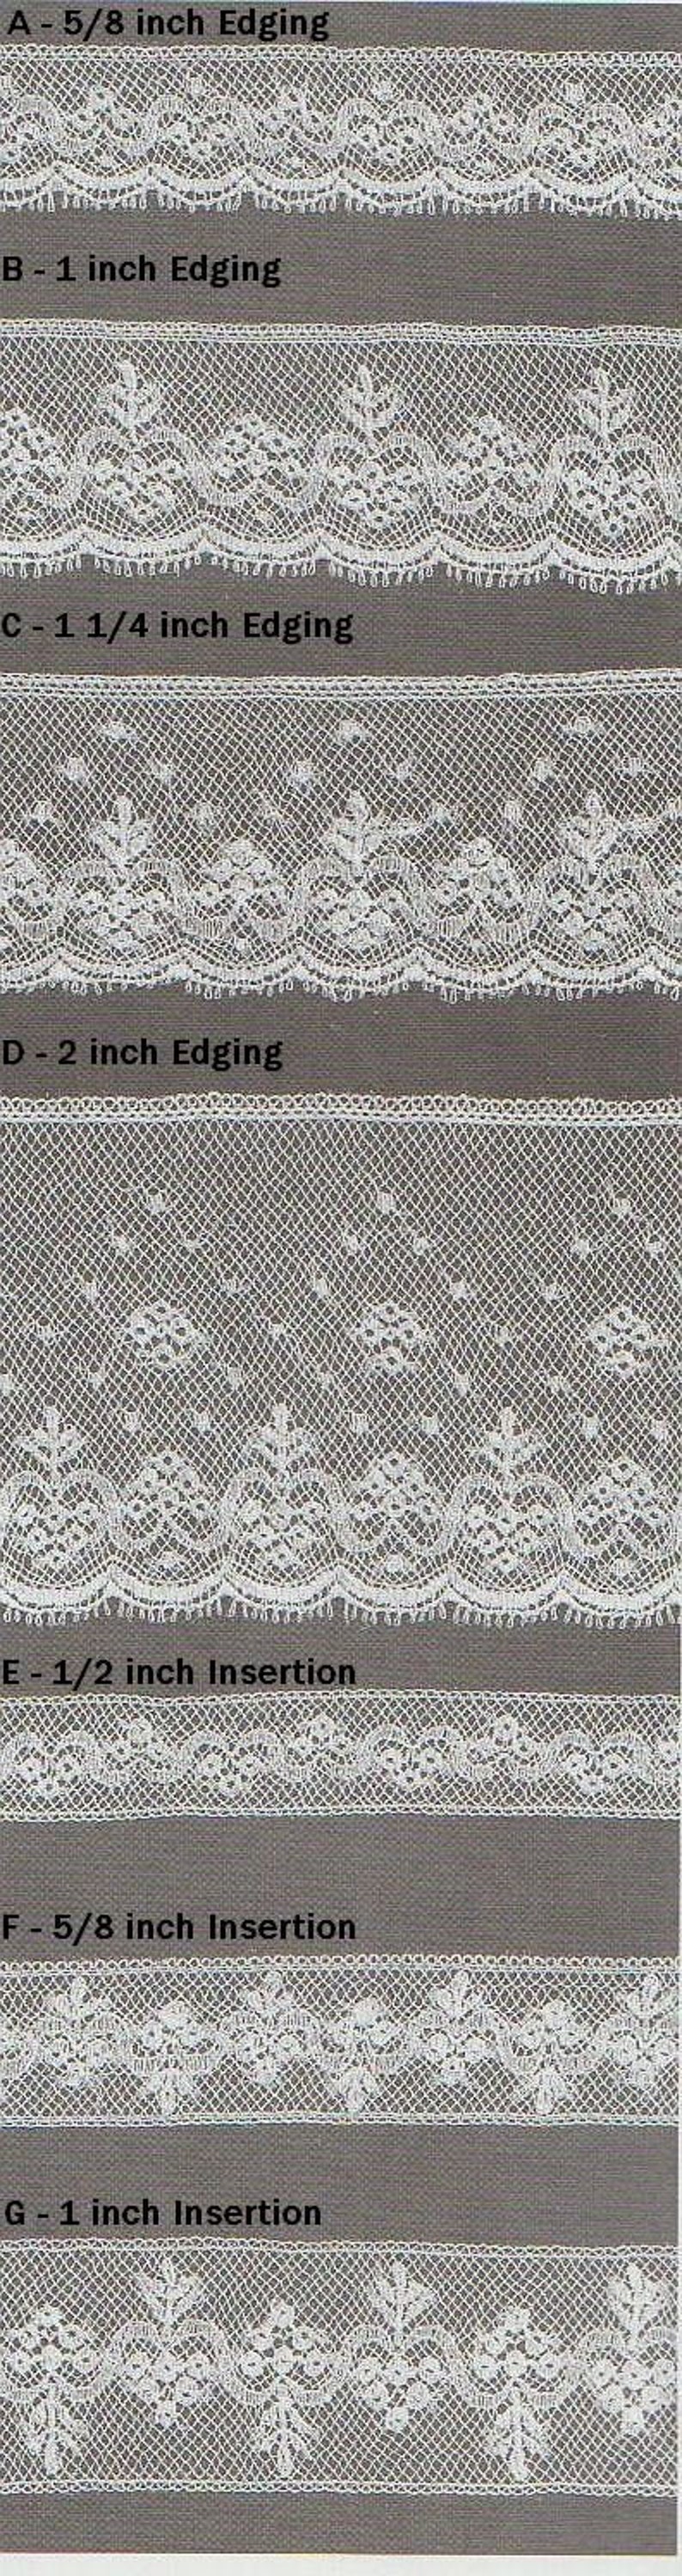 Matching French Maline Cotton Lace Insertion and Edging Available in White and Champagne Heirloom Sewing Doll Dress Supplies image 3